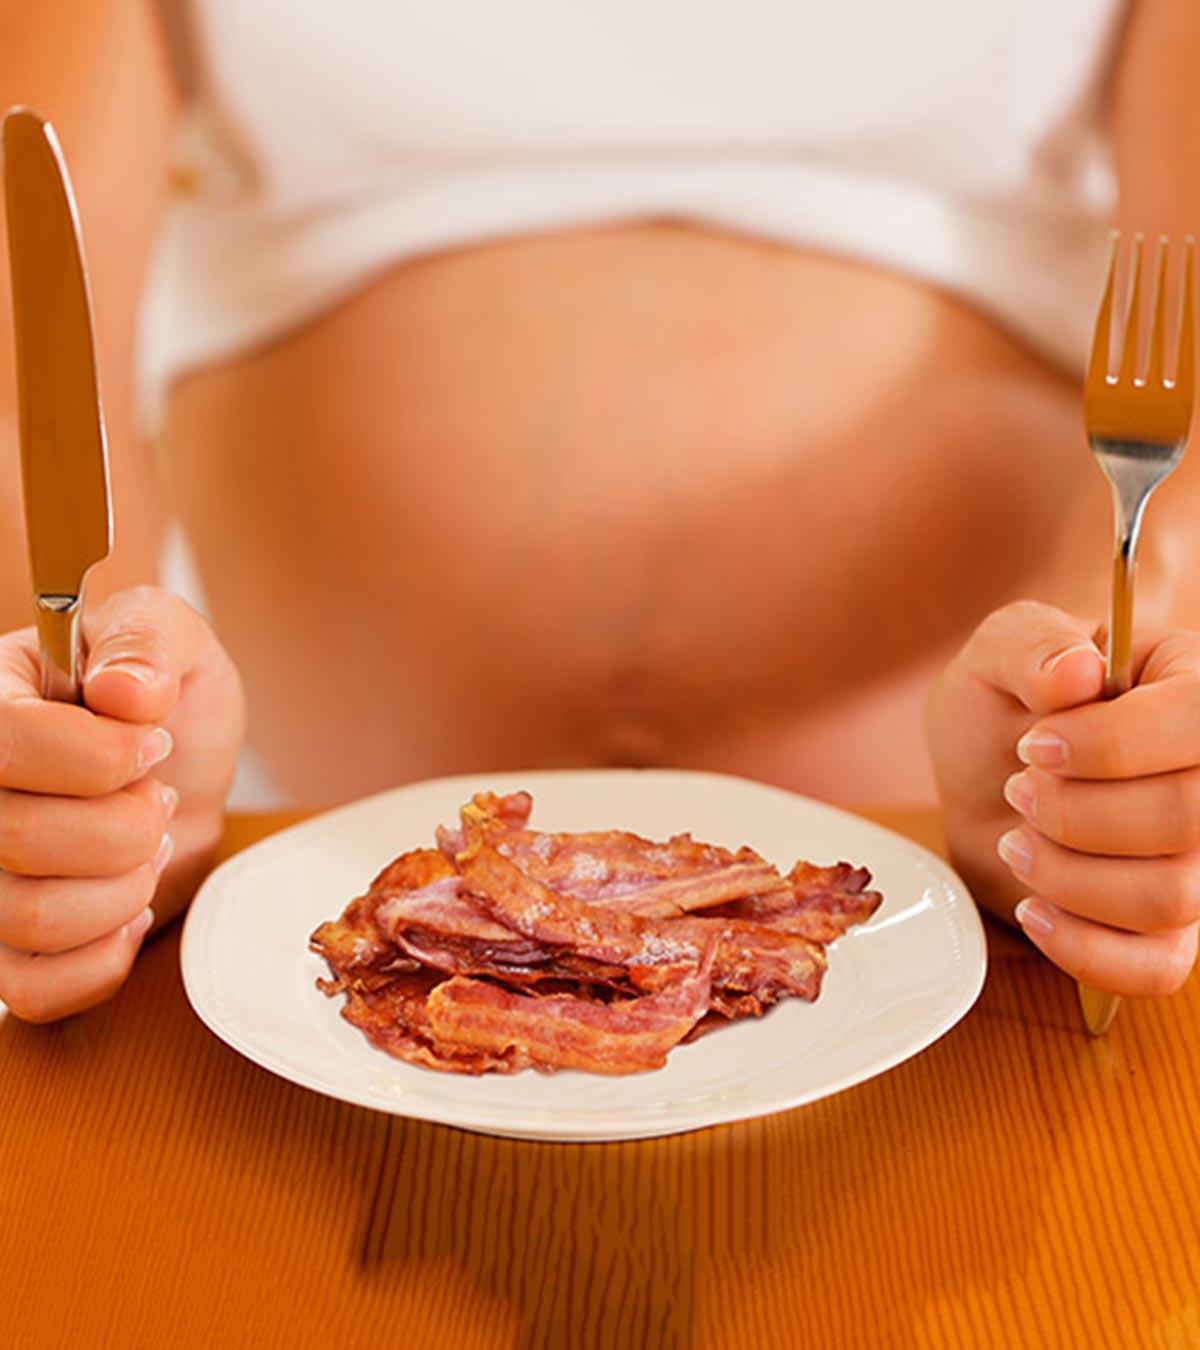 Eating Bacon During Pregnancy